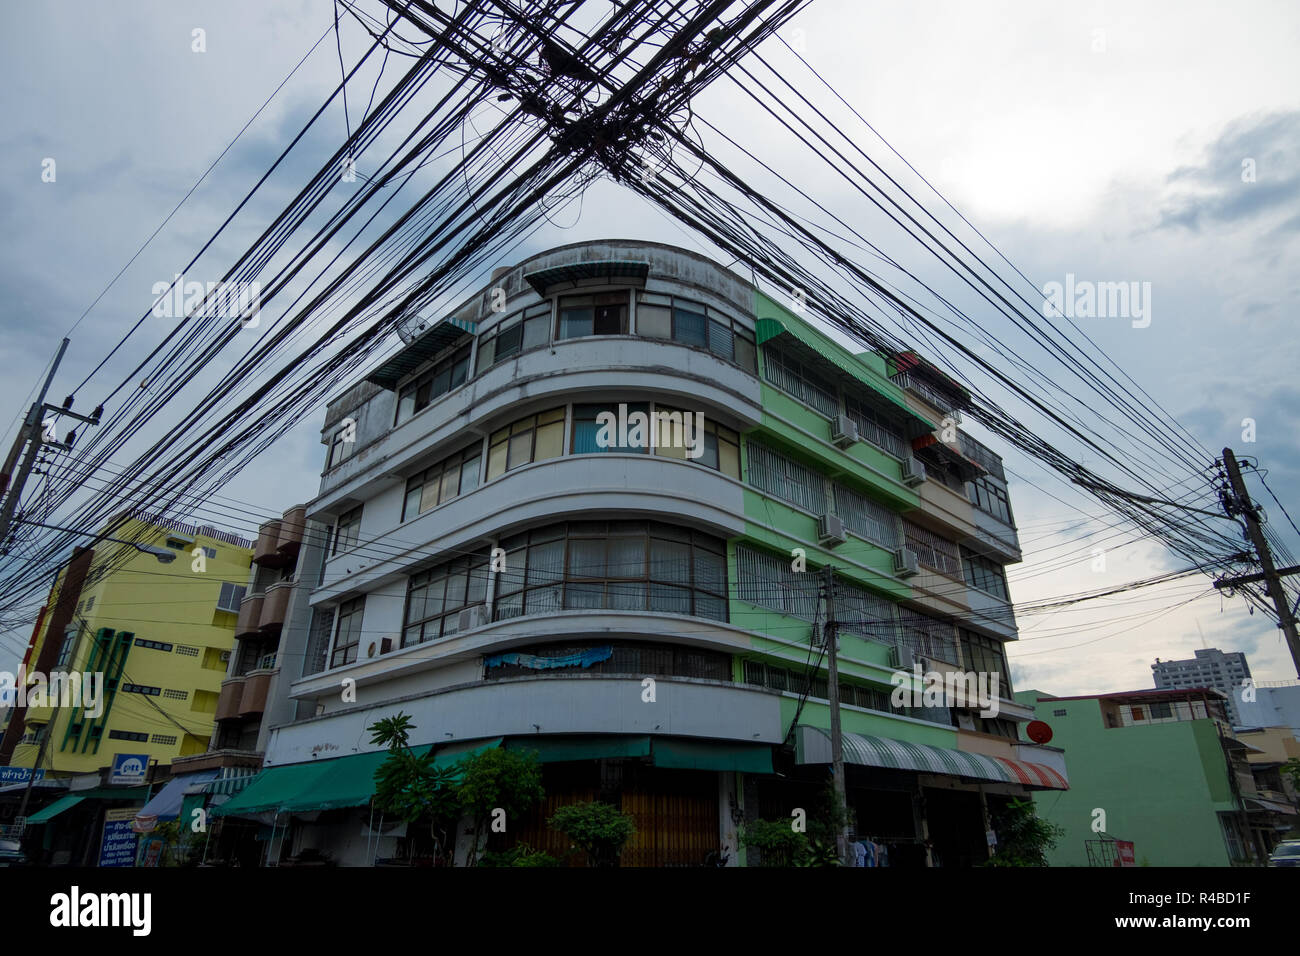 Power lines dominate the skyline in front of an Art Deco style building in Hat Yai, Thailand. Stock Photo